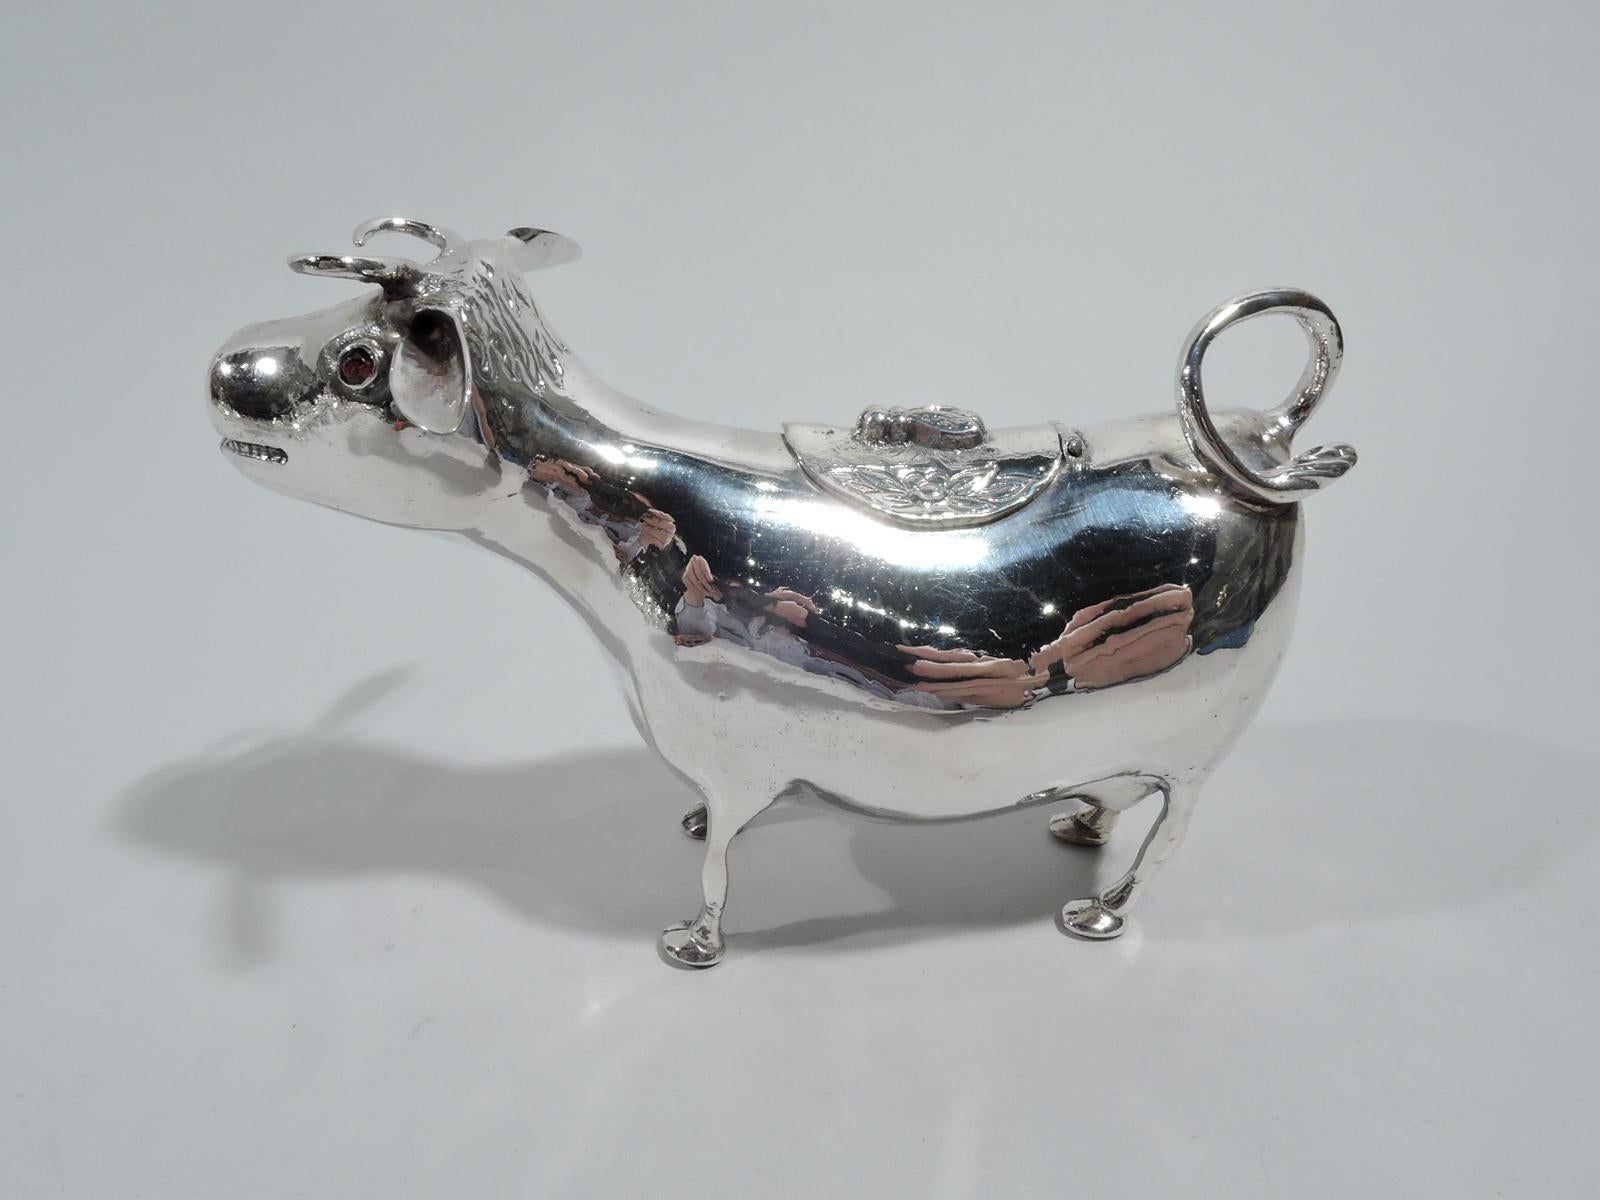 Turn-of-the-century German 800 silver cow creamer. Heavy-set body on skinny legs and firmly planted hoofs. Flicked-back tail handle and hinged back cover with fly finial. A sweet and simple beast with smiley mouth spout and funny flexed ears.